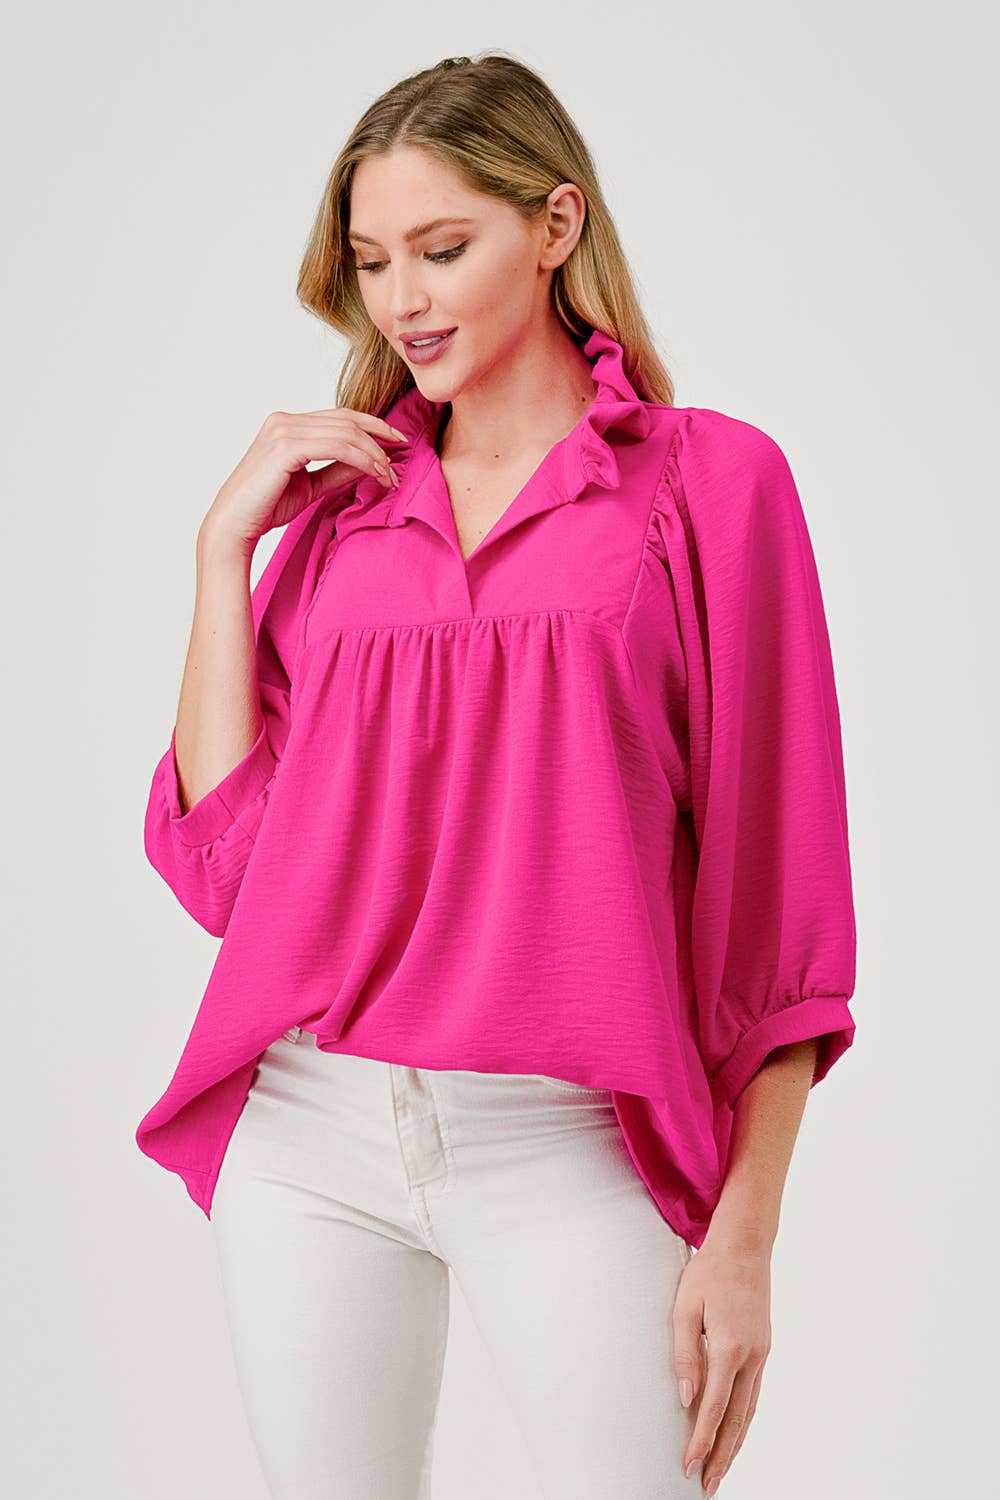 Pink Mandy Elbow Sleeve Cuffed Top with Ruffle Collar